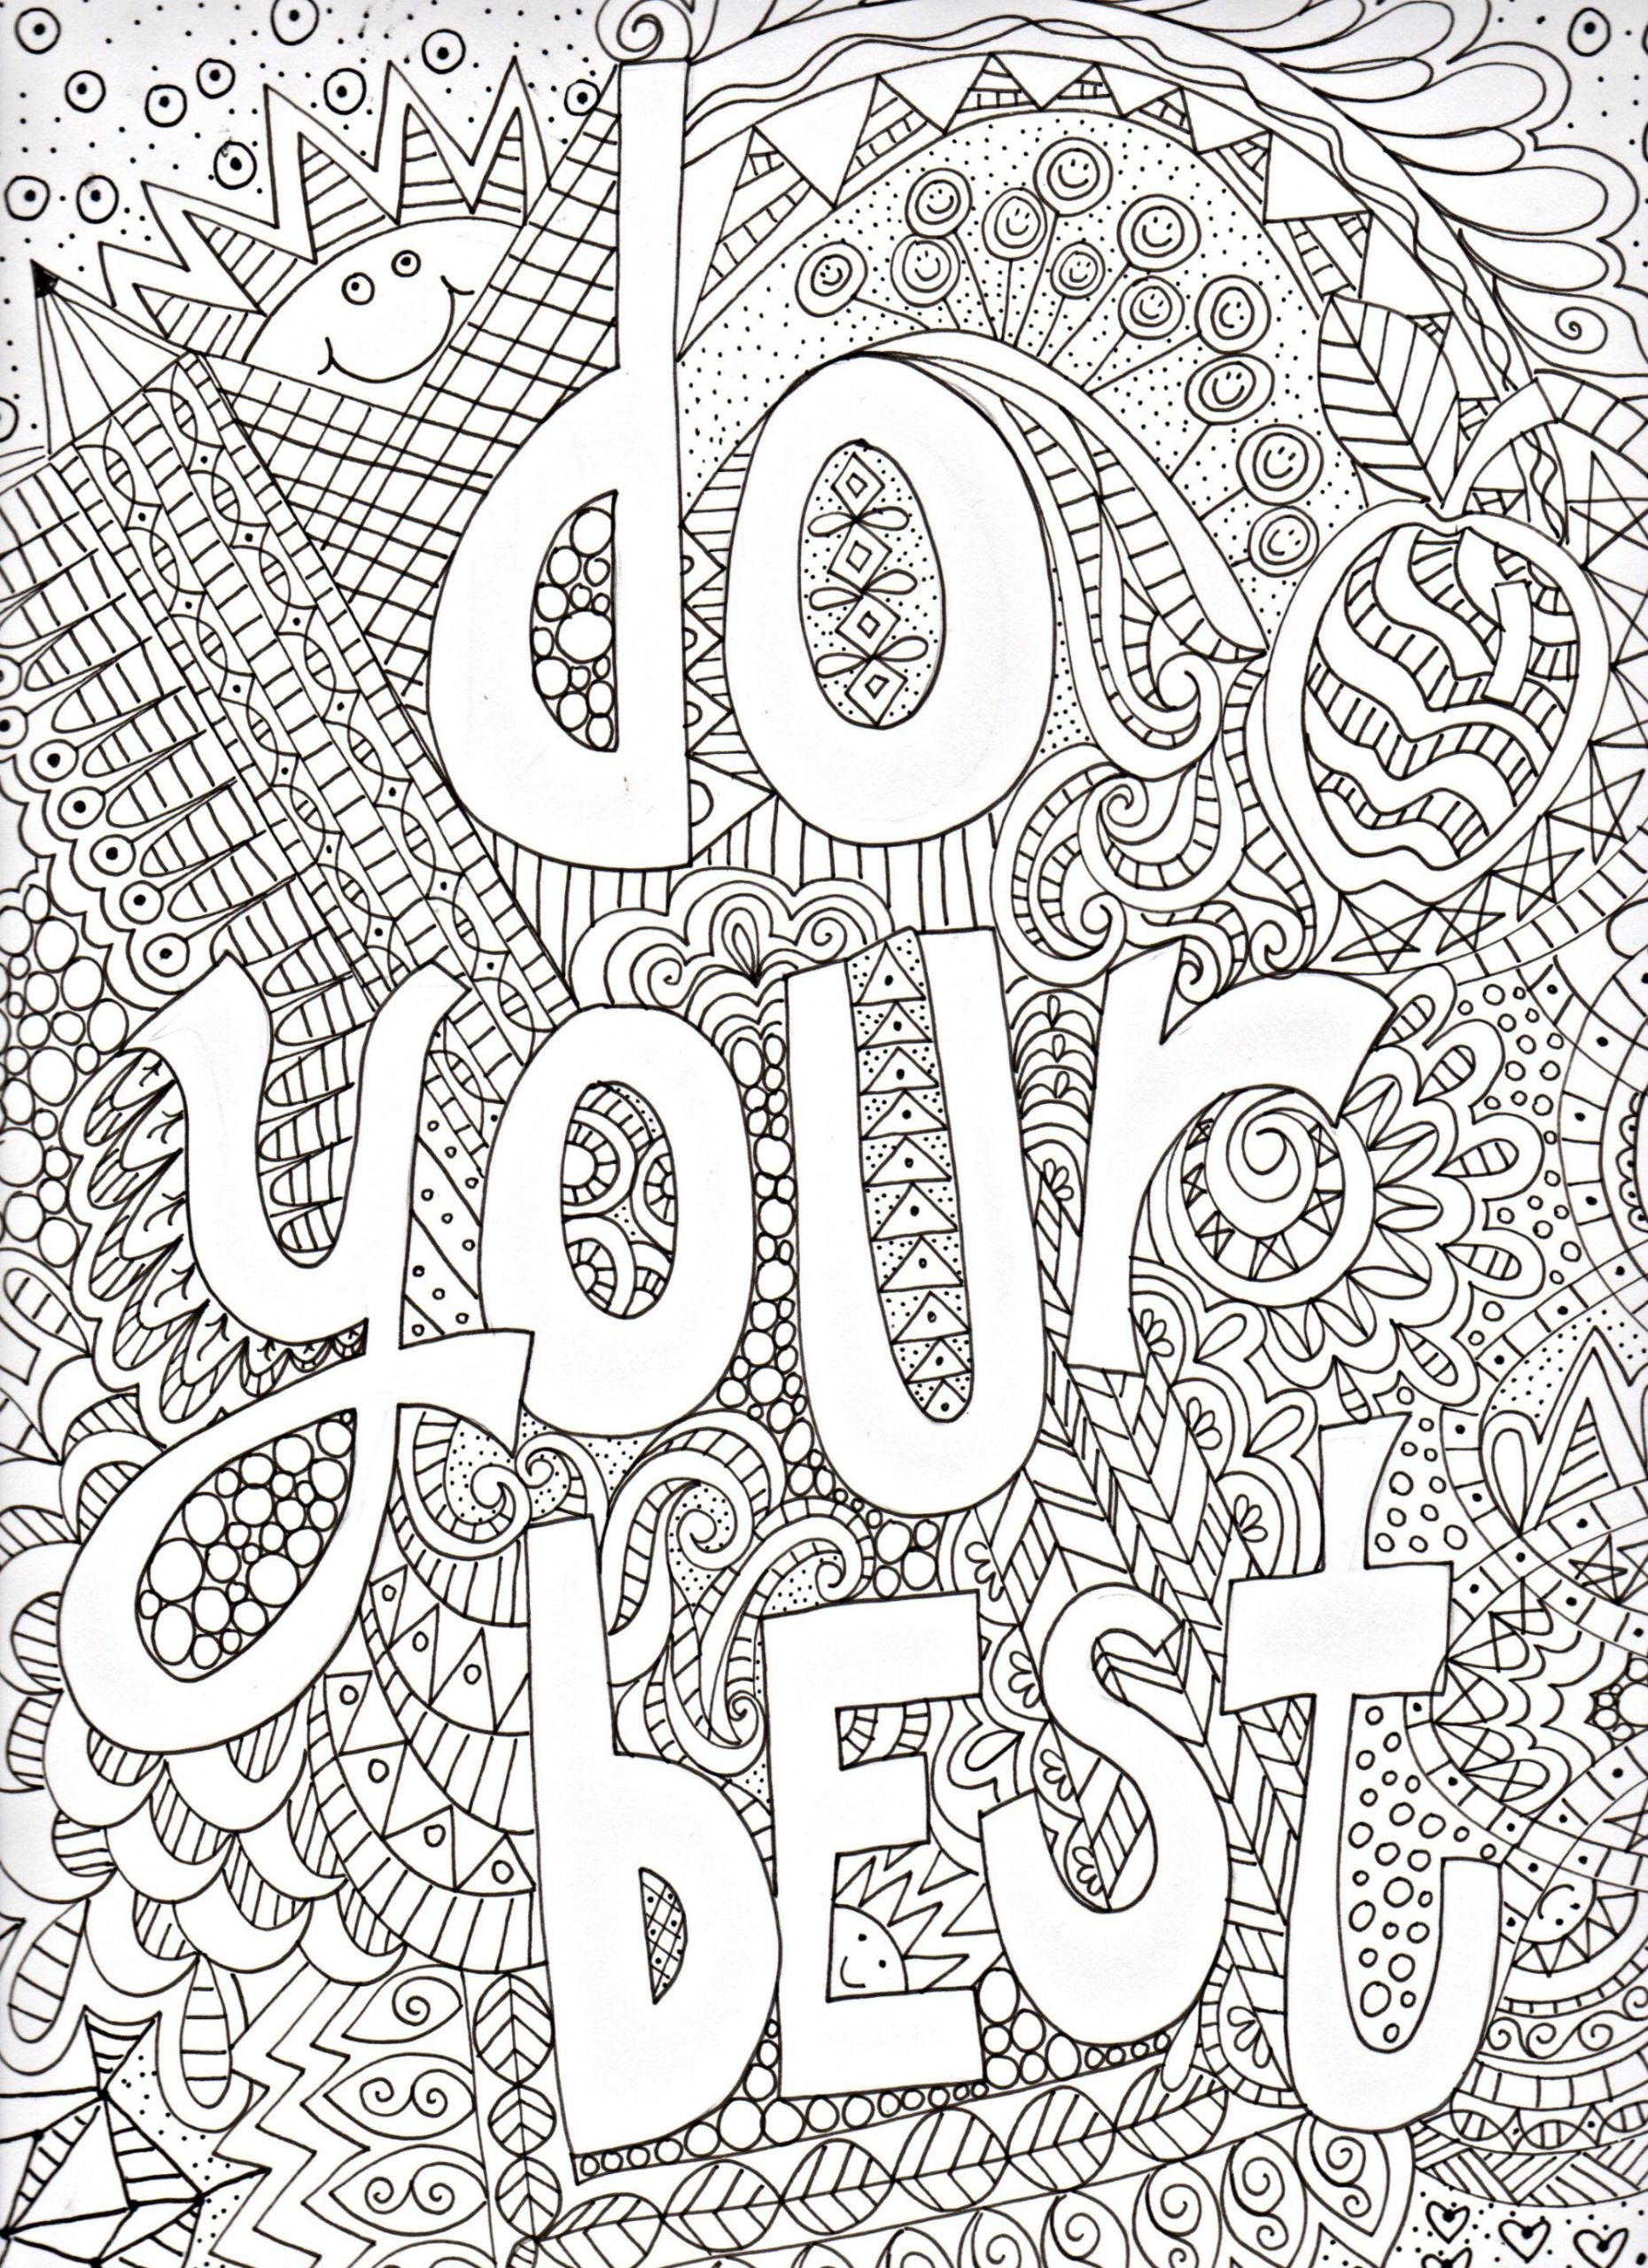 Best Adult Coloring Pages
 Get out those colored pencils and have some doodle fun